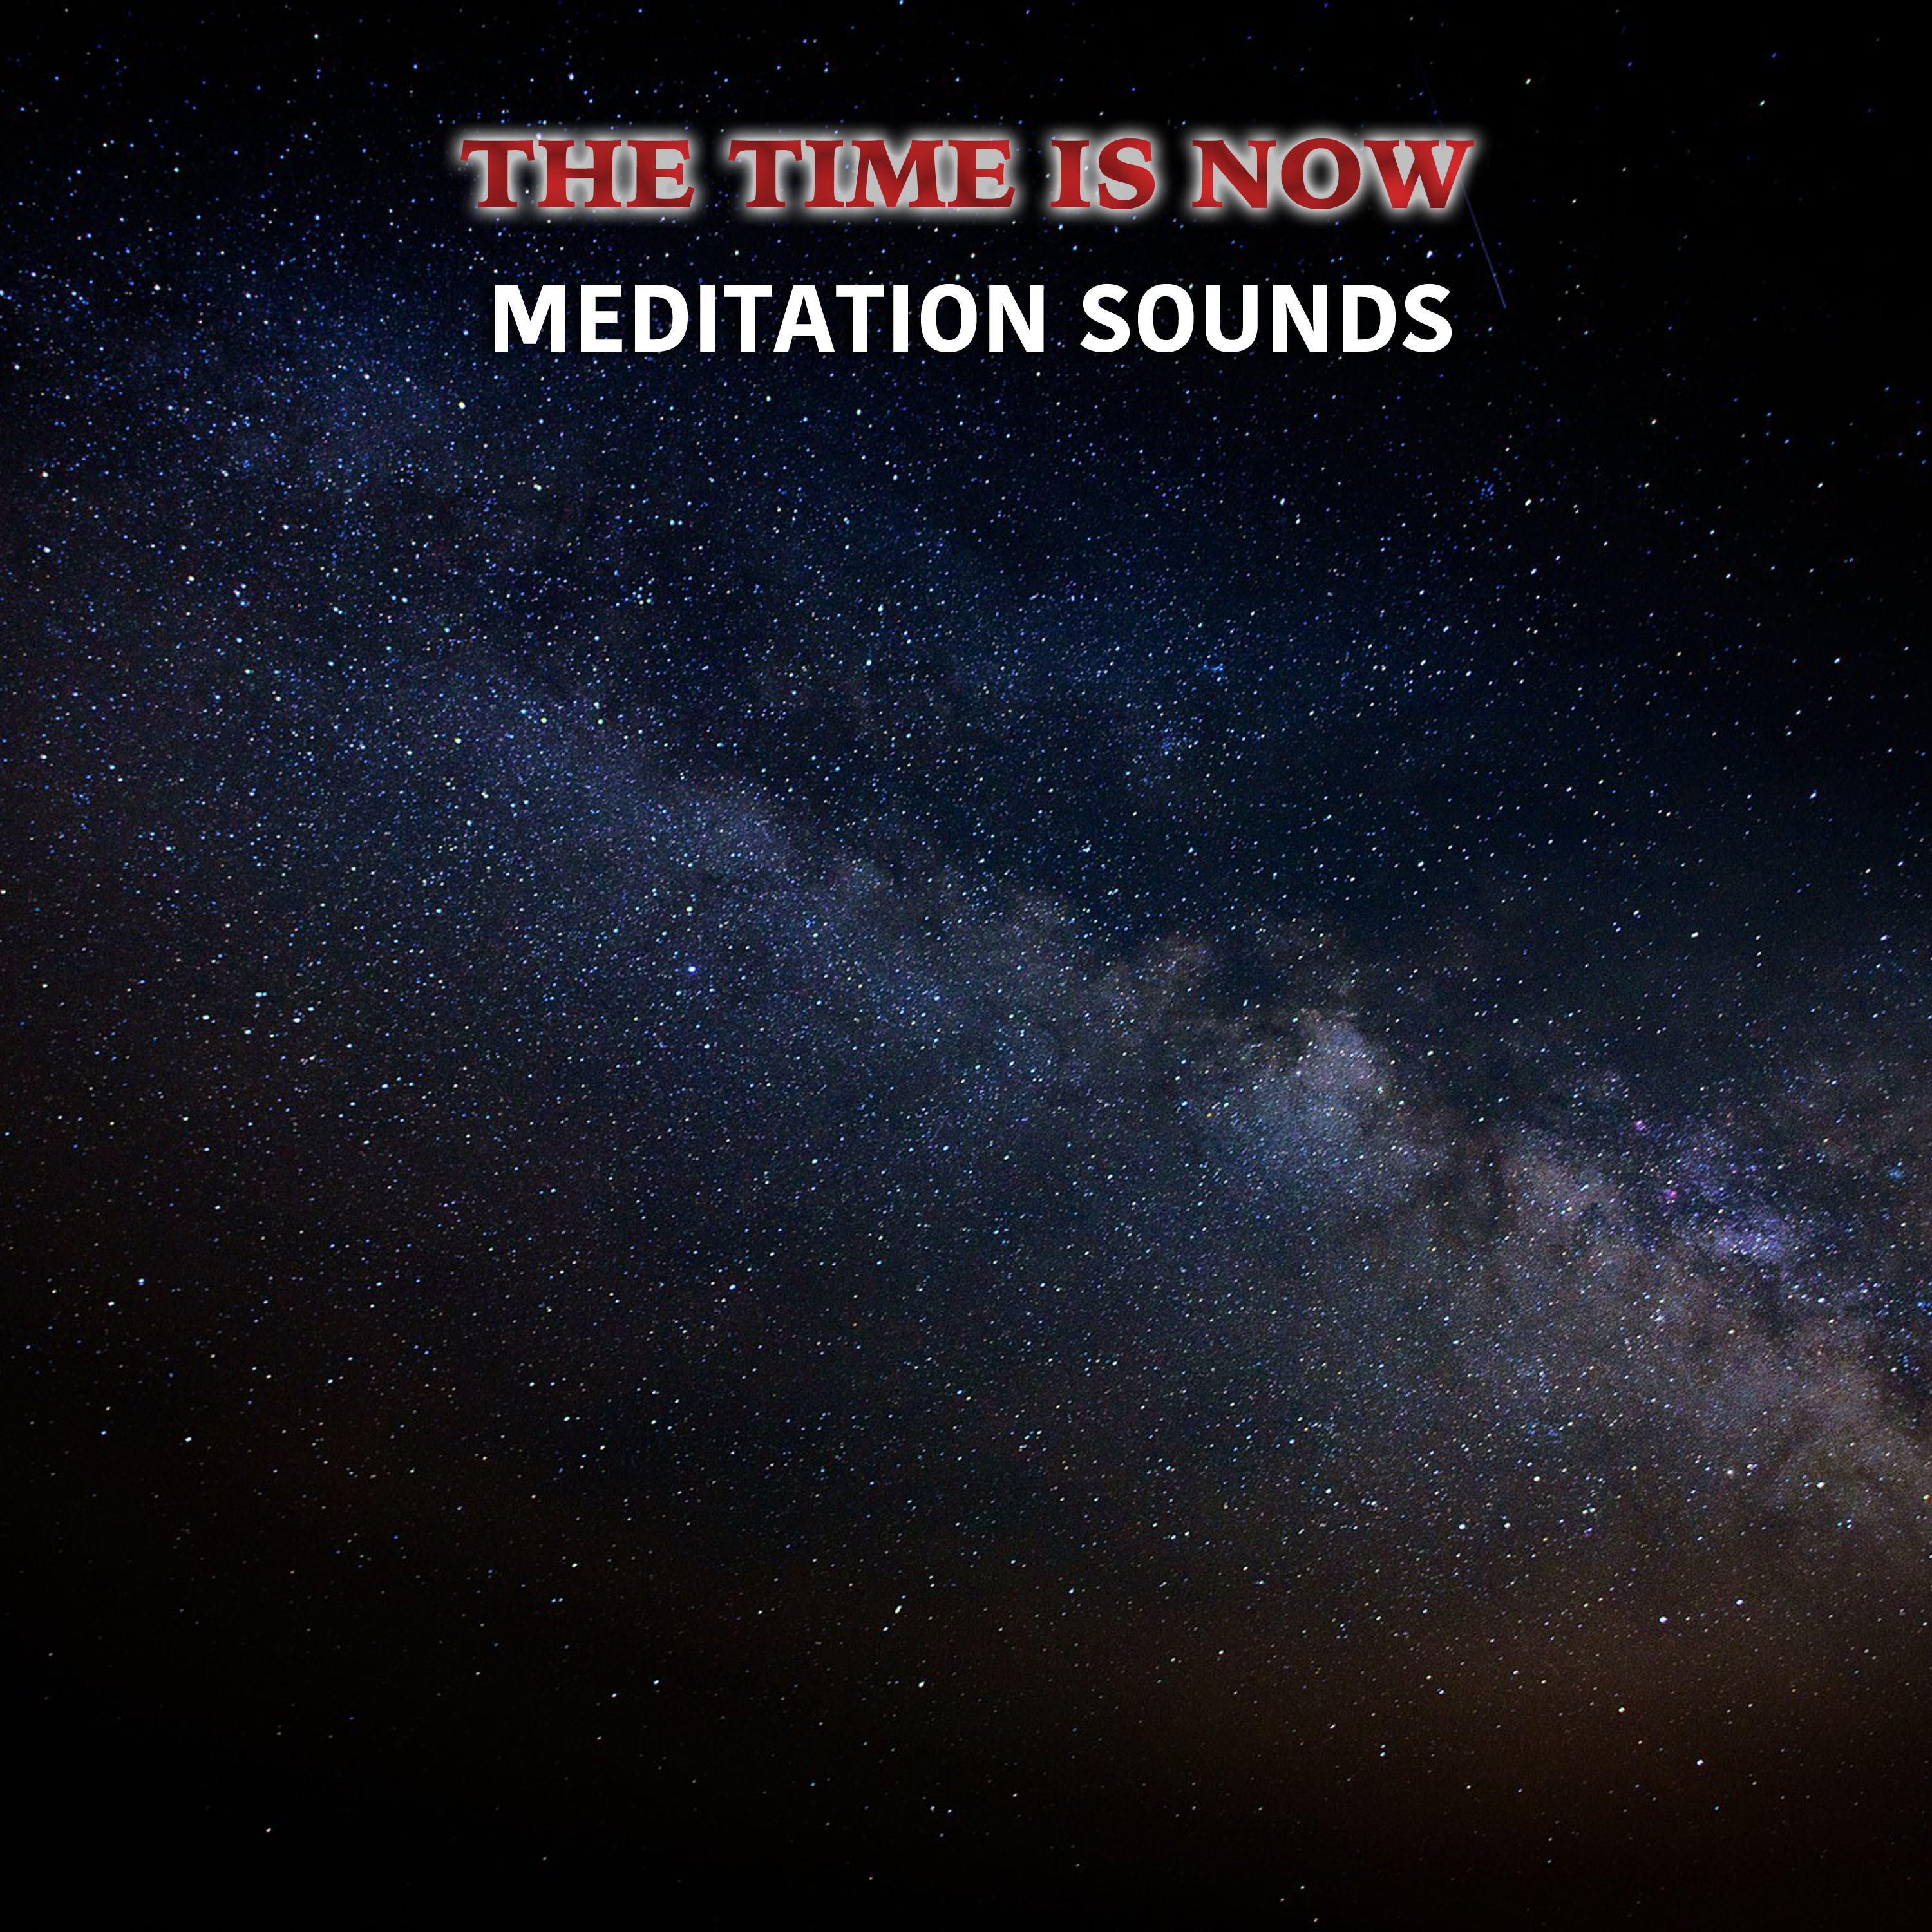 17 The Time is Now Meditation Sounds